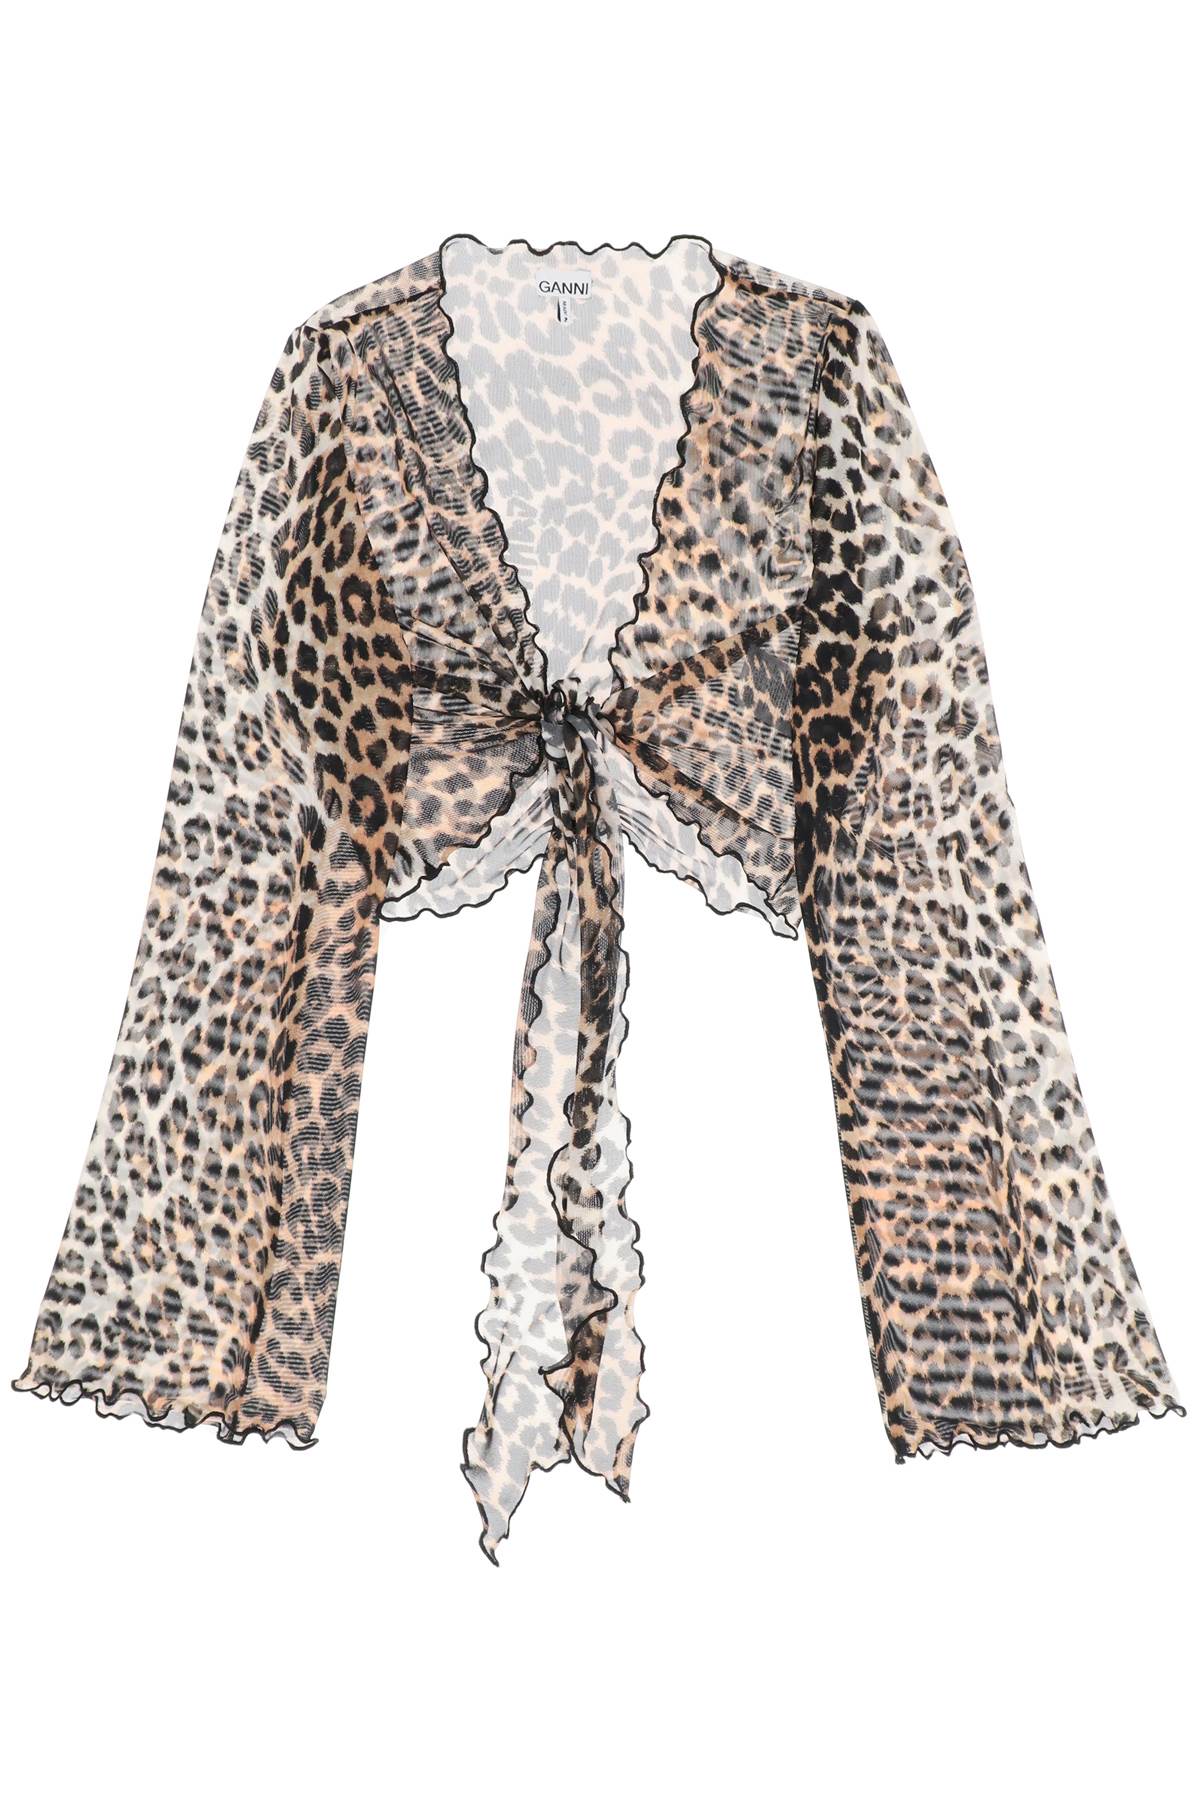 Ganni cover up cropped top in mesh with leopard print-0